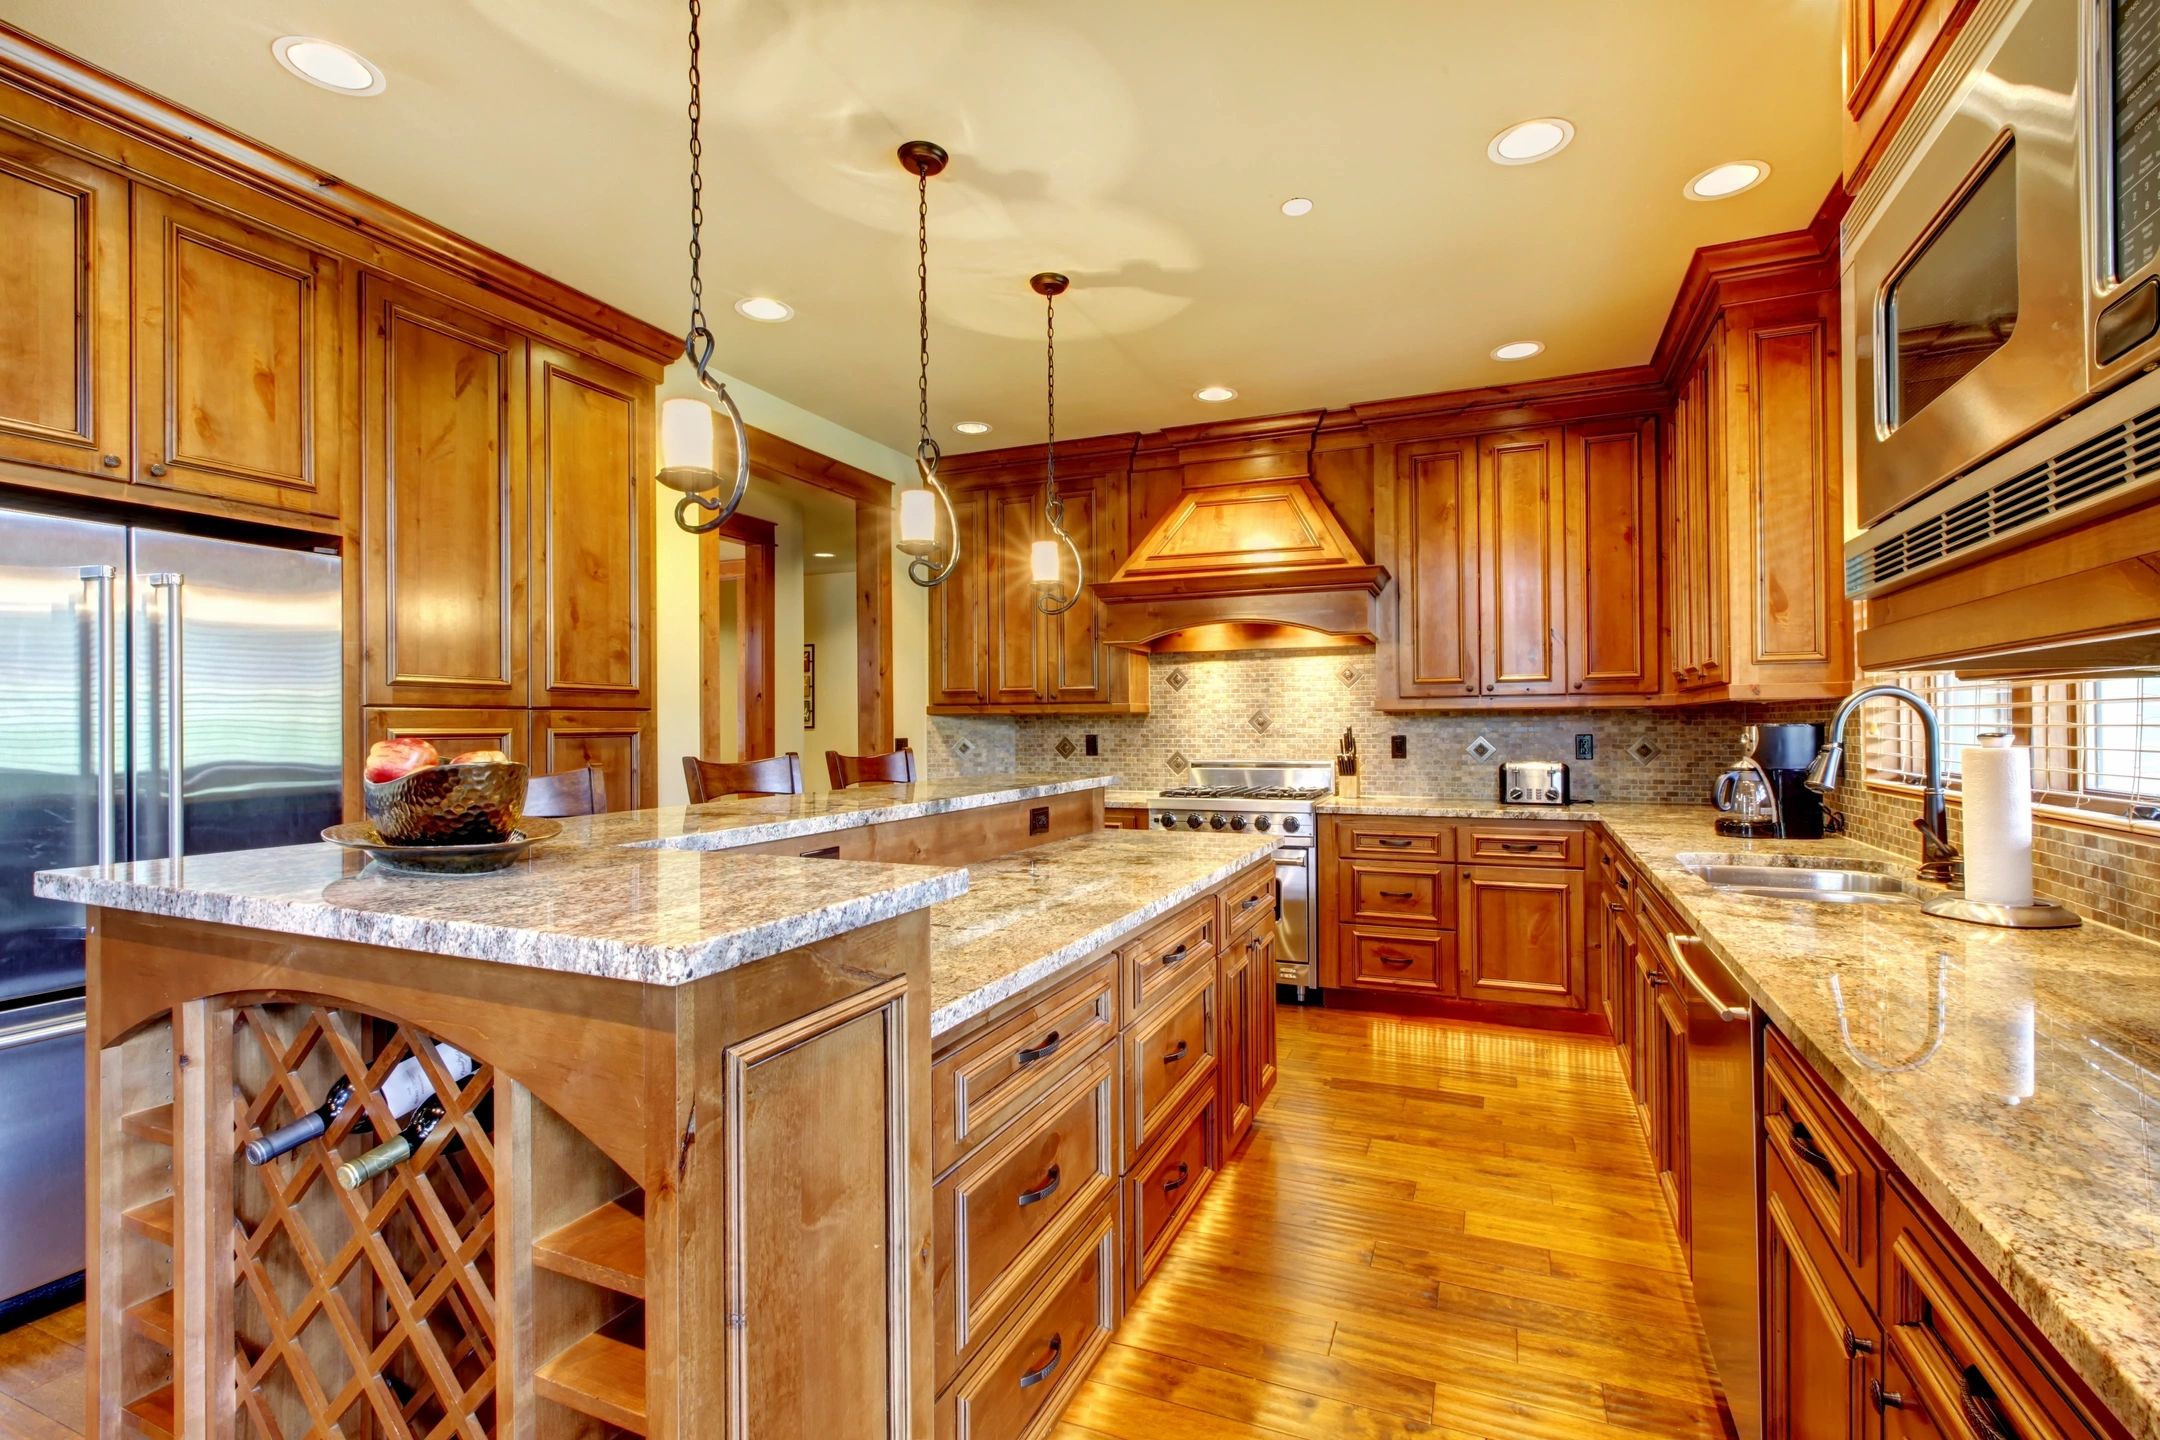 Kitchen with custom cabinets,granite countertops and stainless steel appliances.